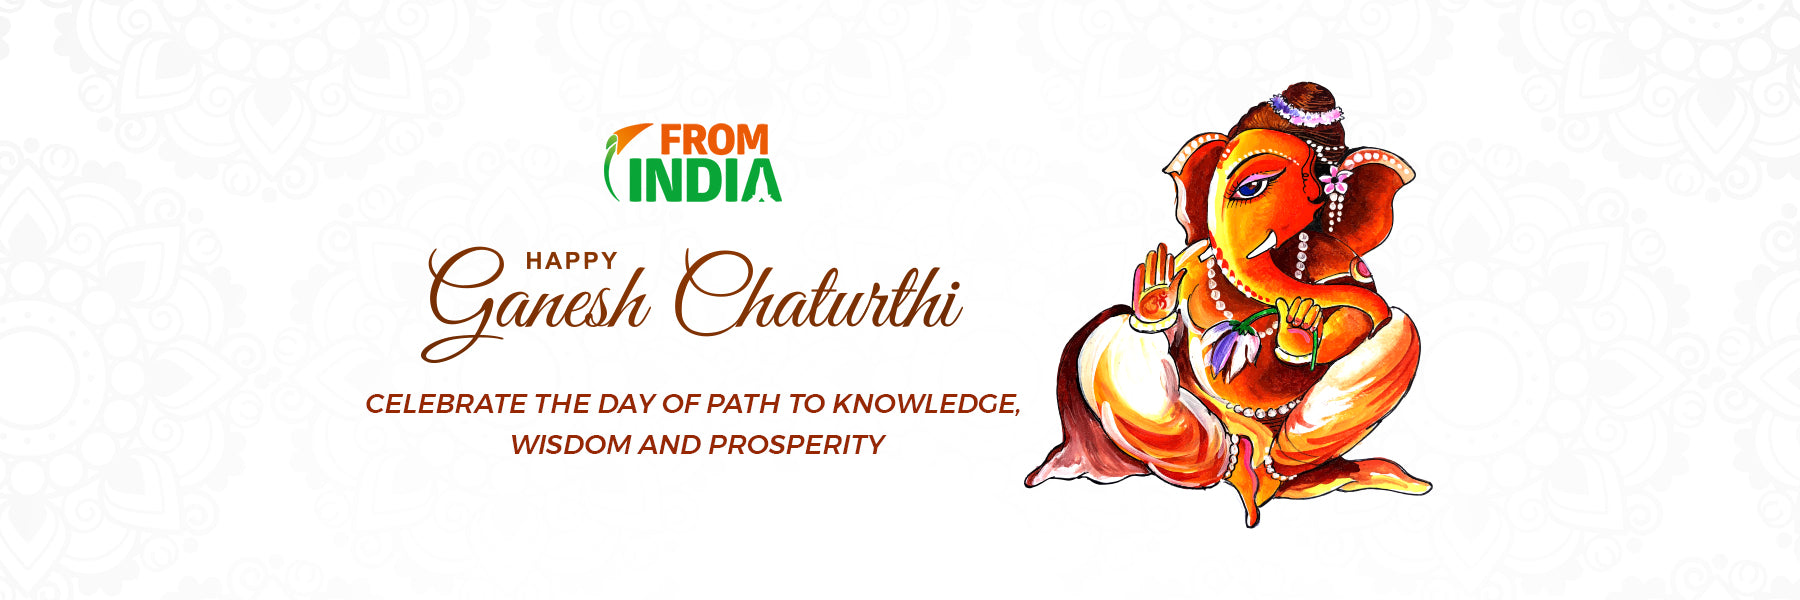 The Day of Path to Knowledge, Wisdom & Prosperity FromIndia.com